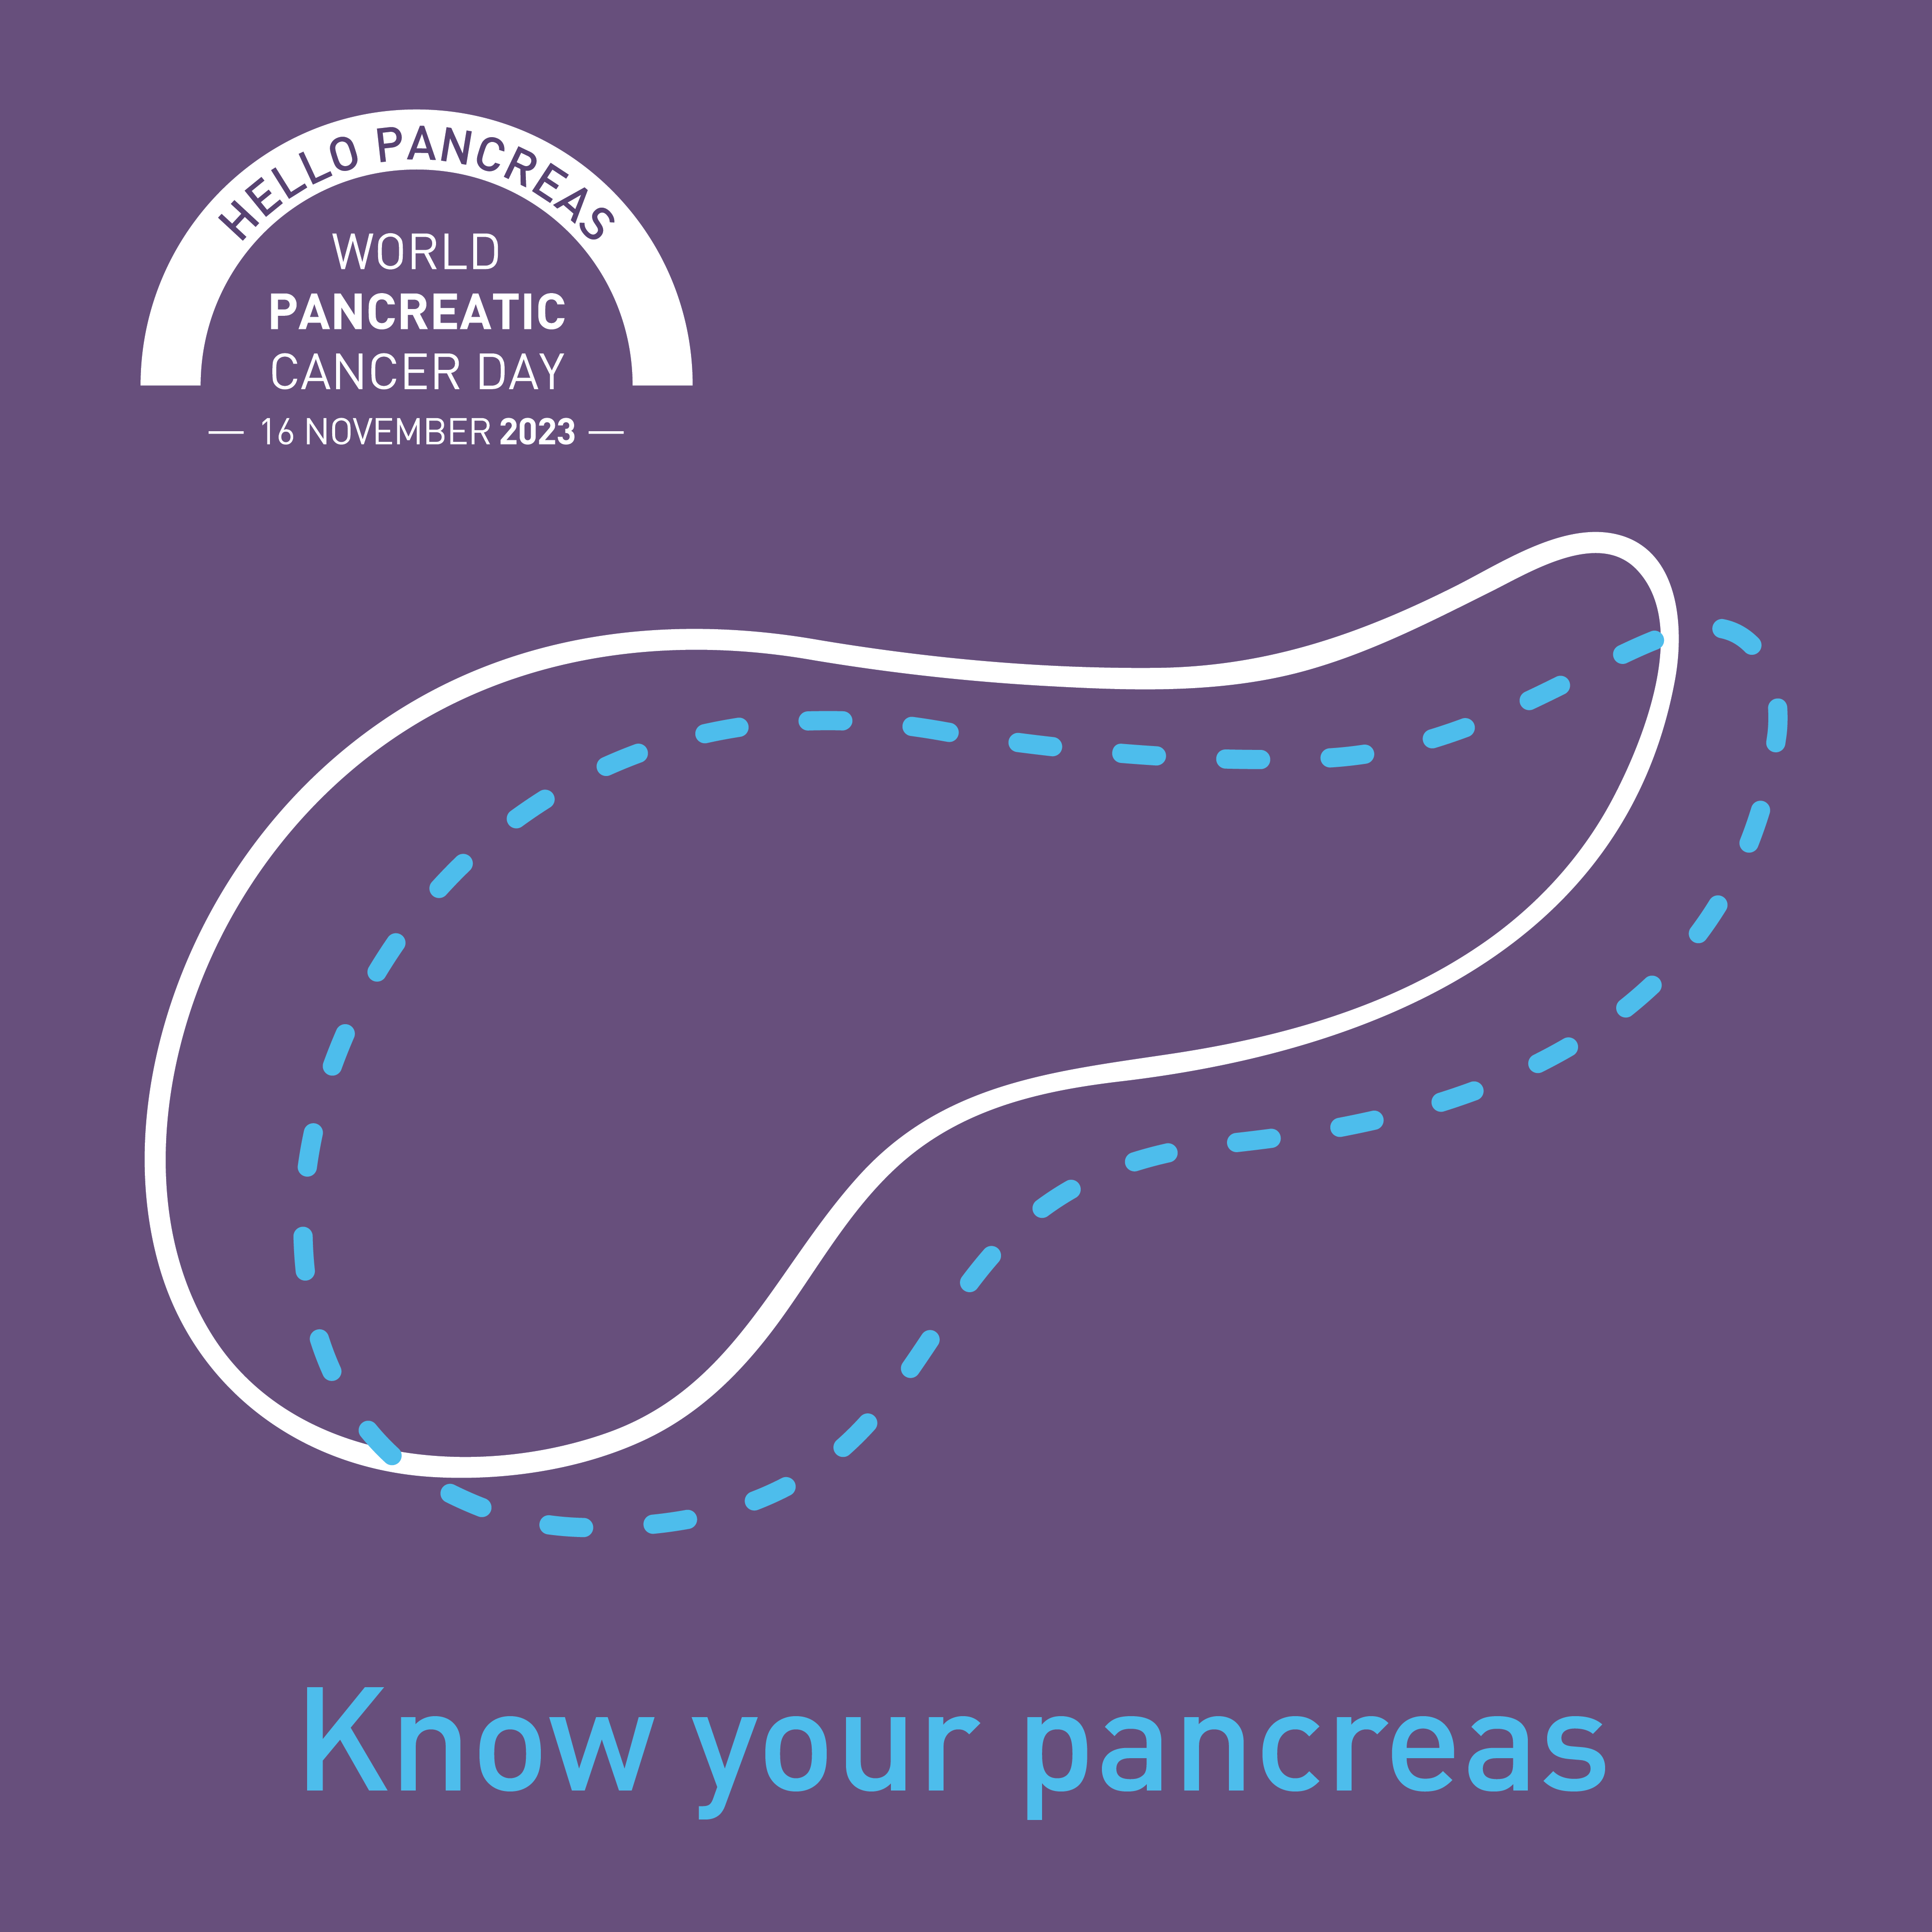 United Front in the Battle Against Pancreatic Cancer